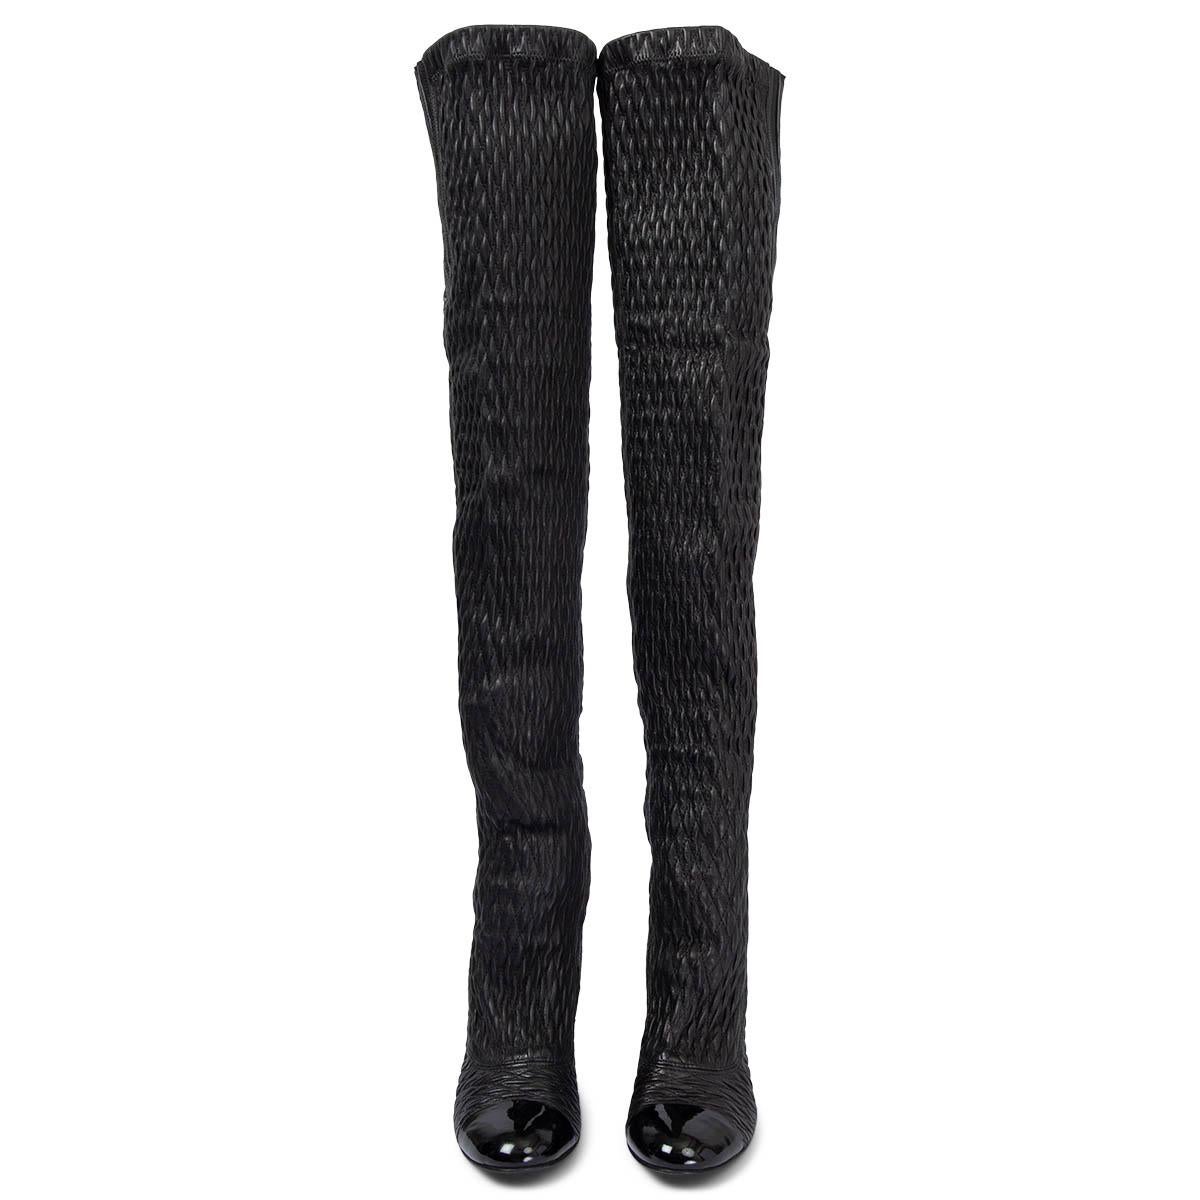 100% authentic Chanel quilted over-knee boots in black stretchy lambskin with a black patent leather heel and tip. Have been worn once or twice and are in virtually new condition. Come with dust bag. 

Measurements
Imprinted Size	36.5
Shoe